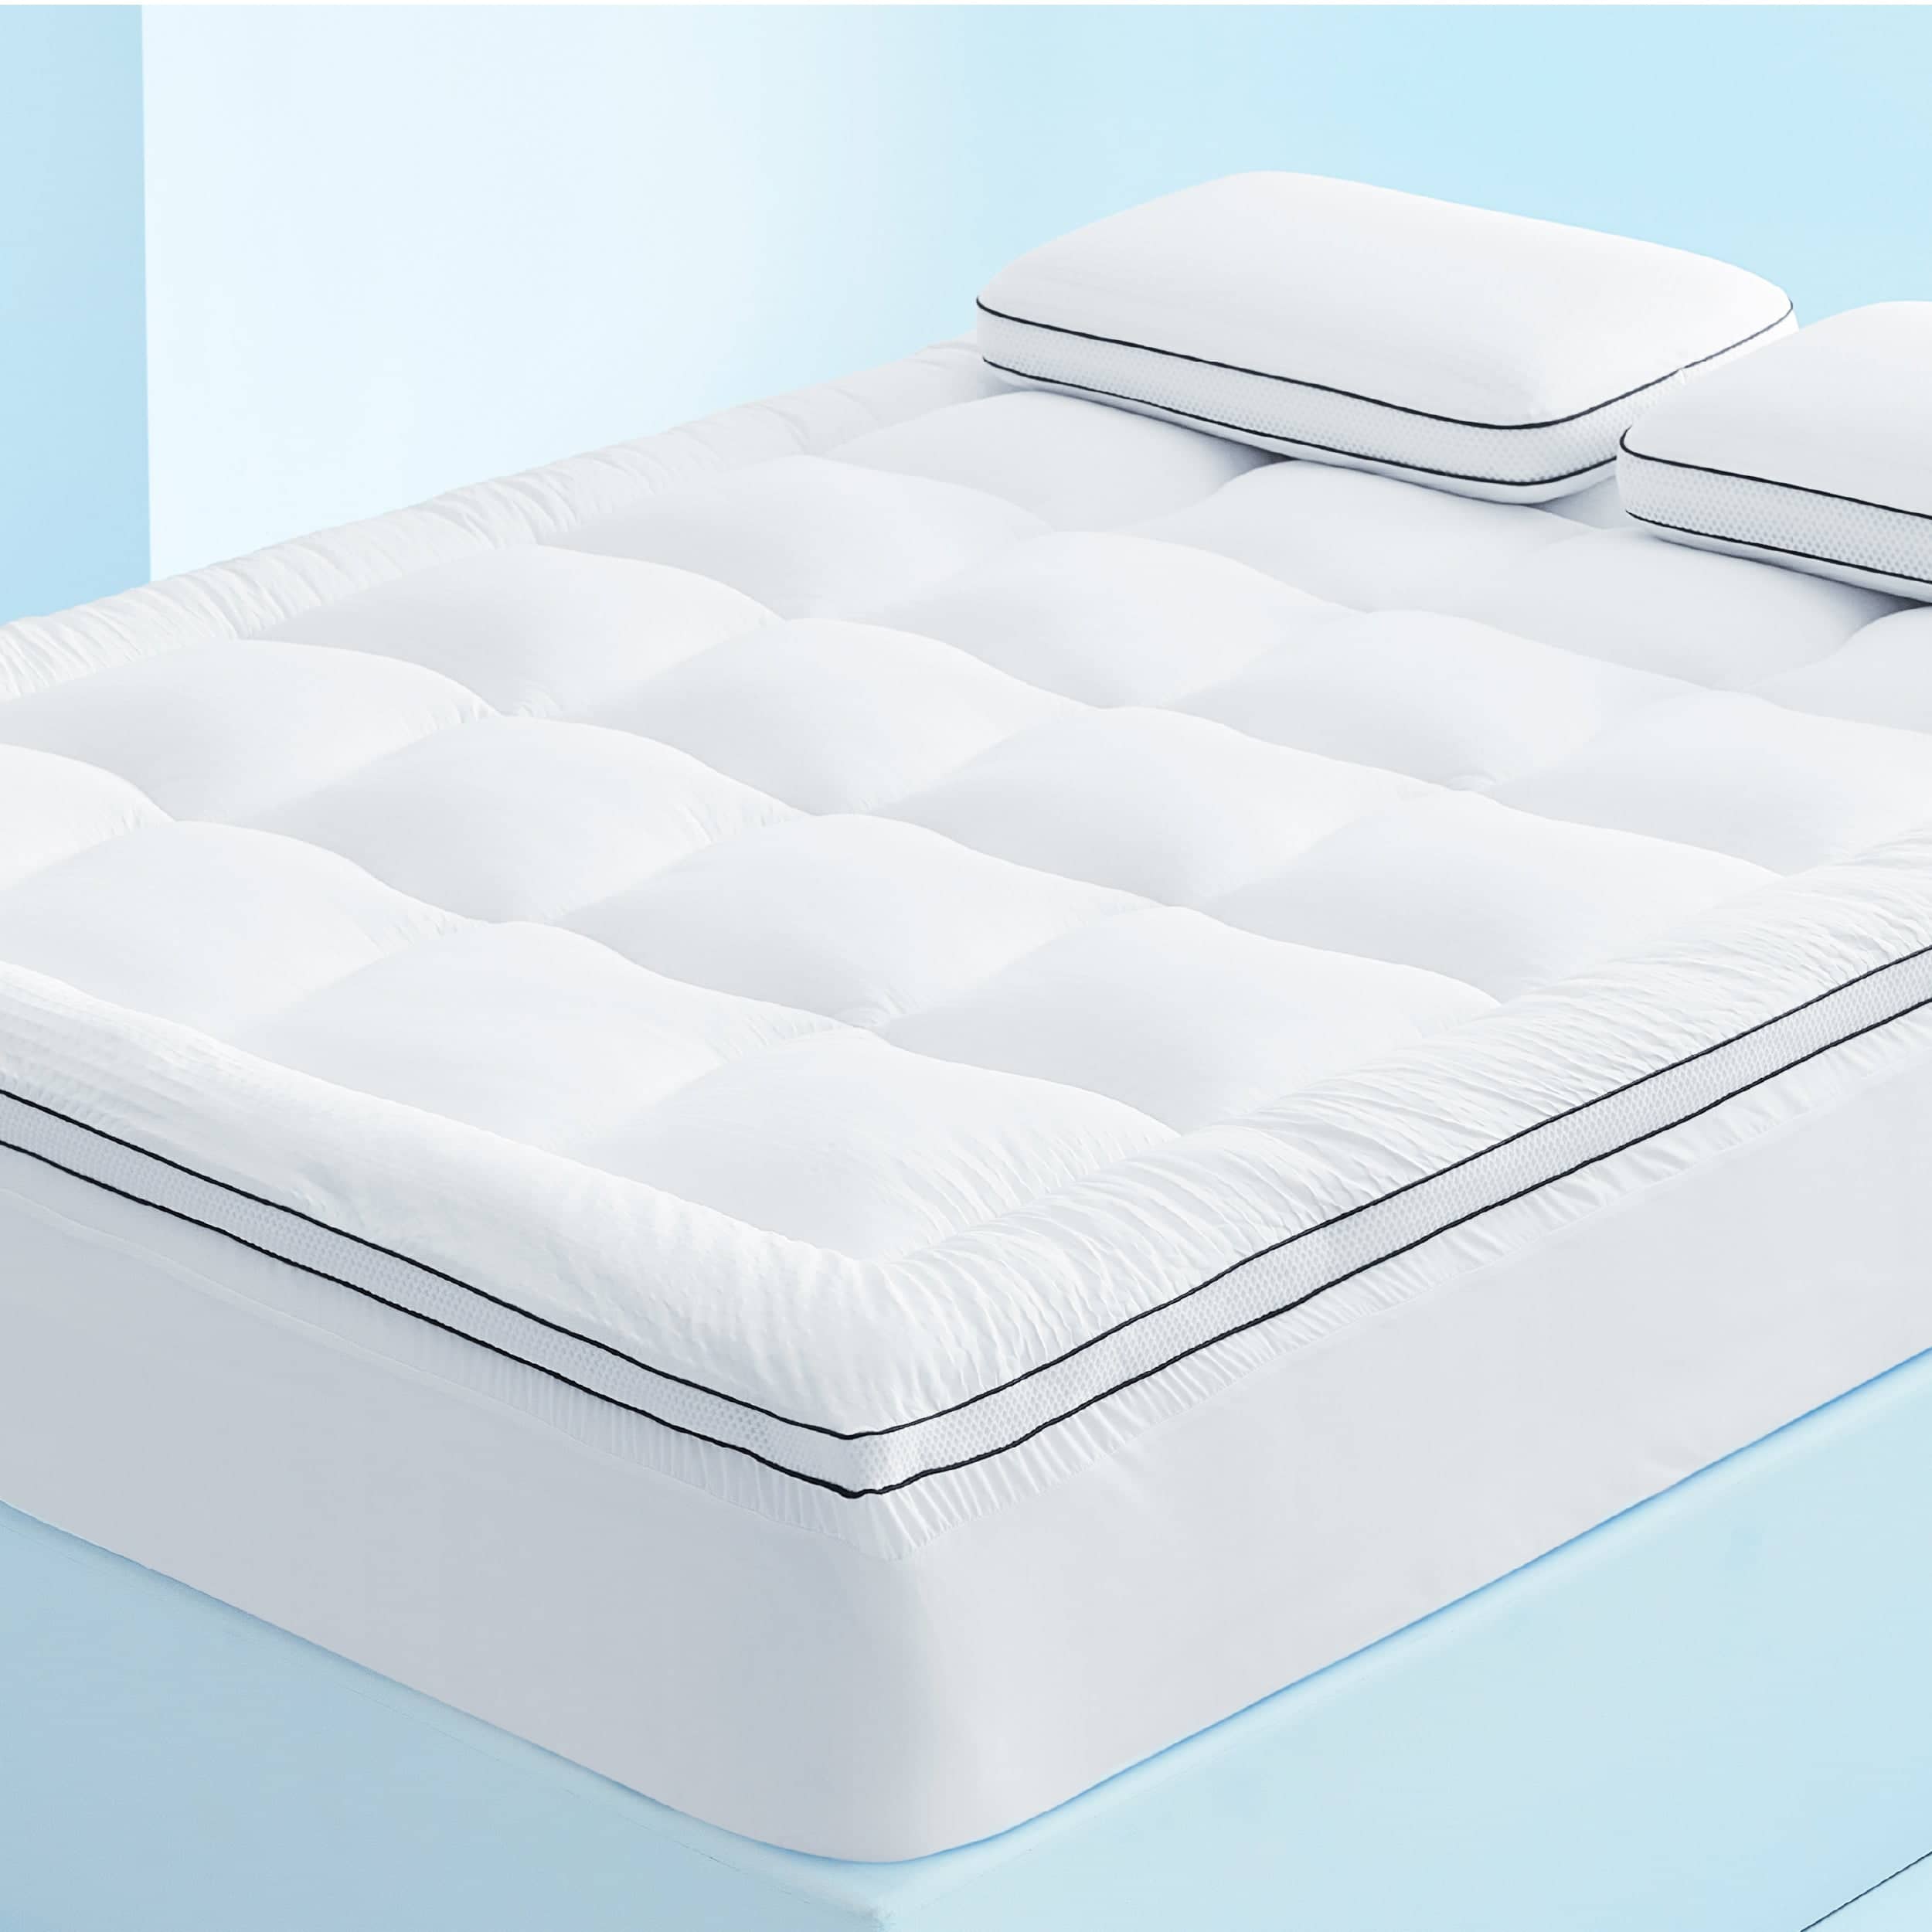 Bedsure Breescape Extra Cooling Mattress Topper with Thick Pillow Top